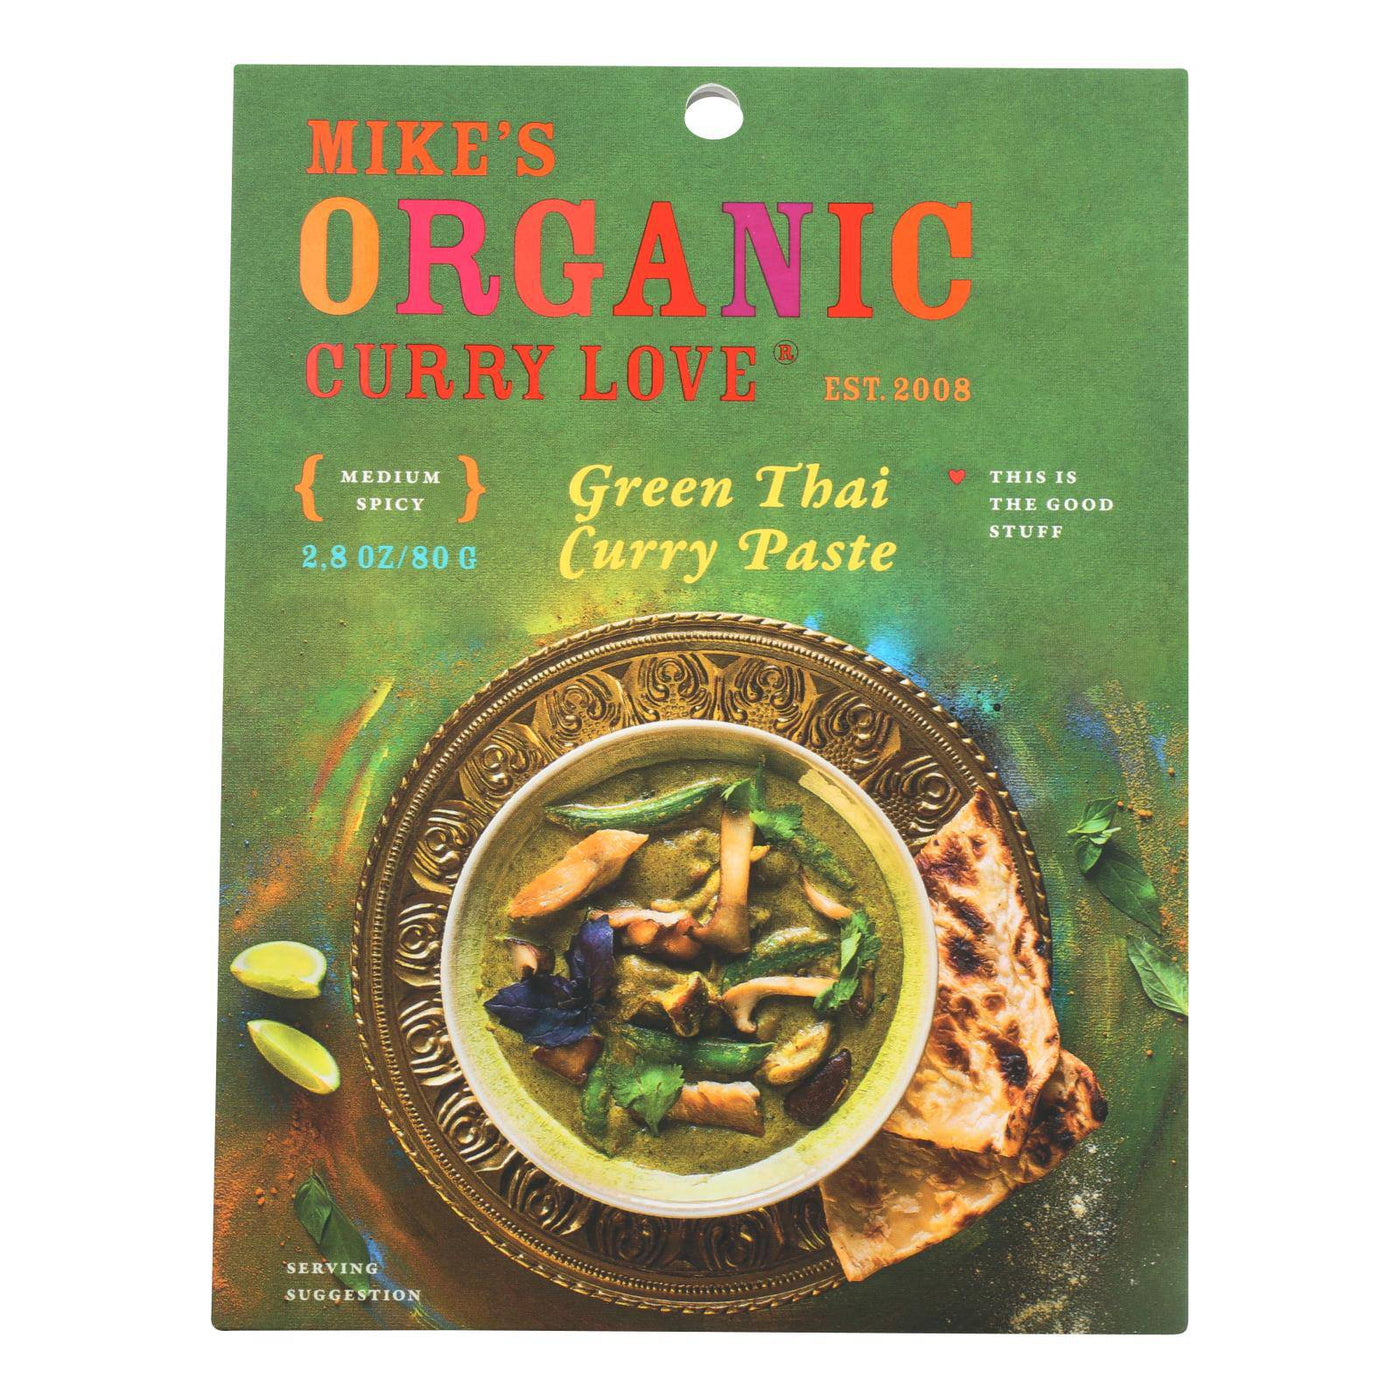 Mike's Organic Curry Love - Organic Curry Paste - Green Thai - Case Of 6 - 2.8 Oz. | OnlyNaturals.us